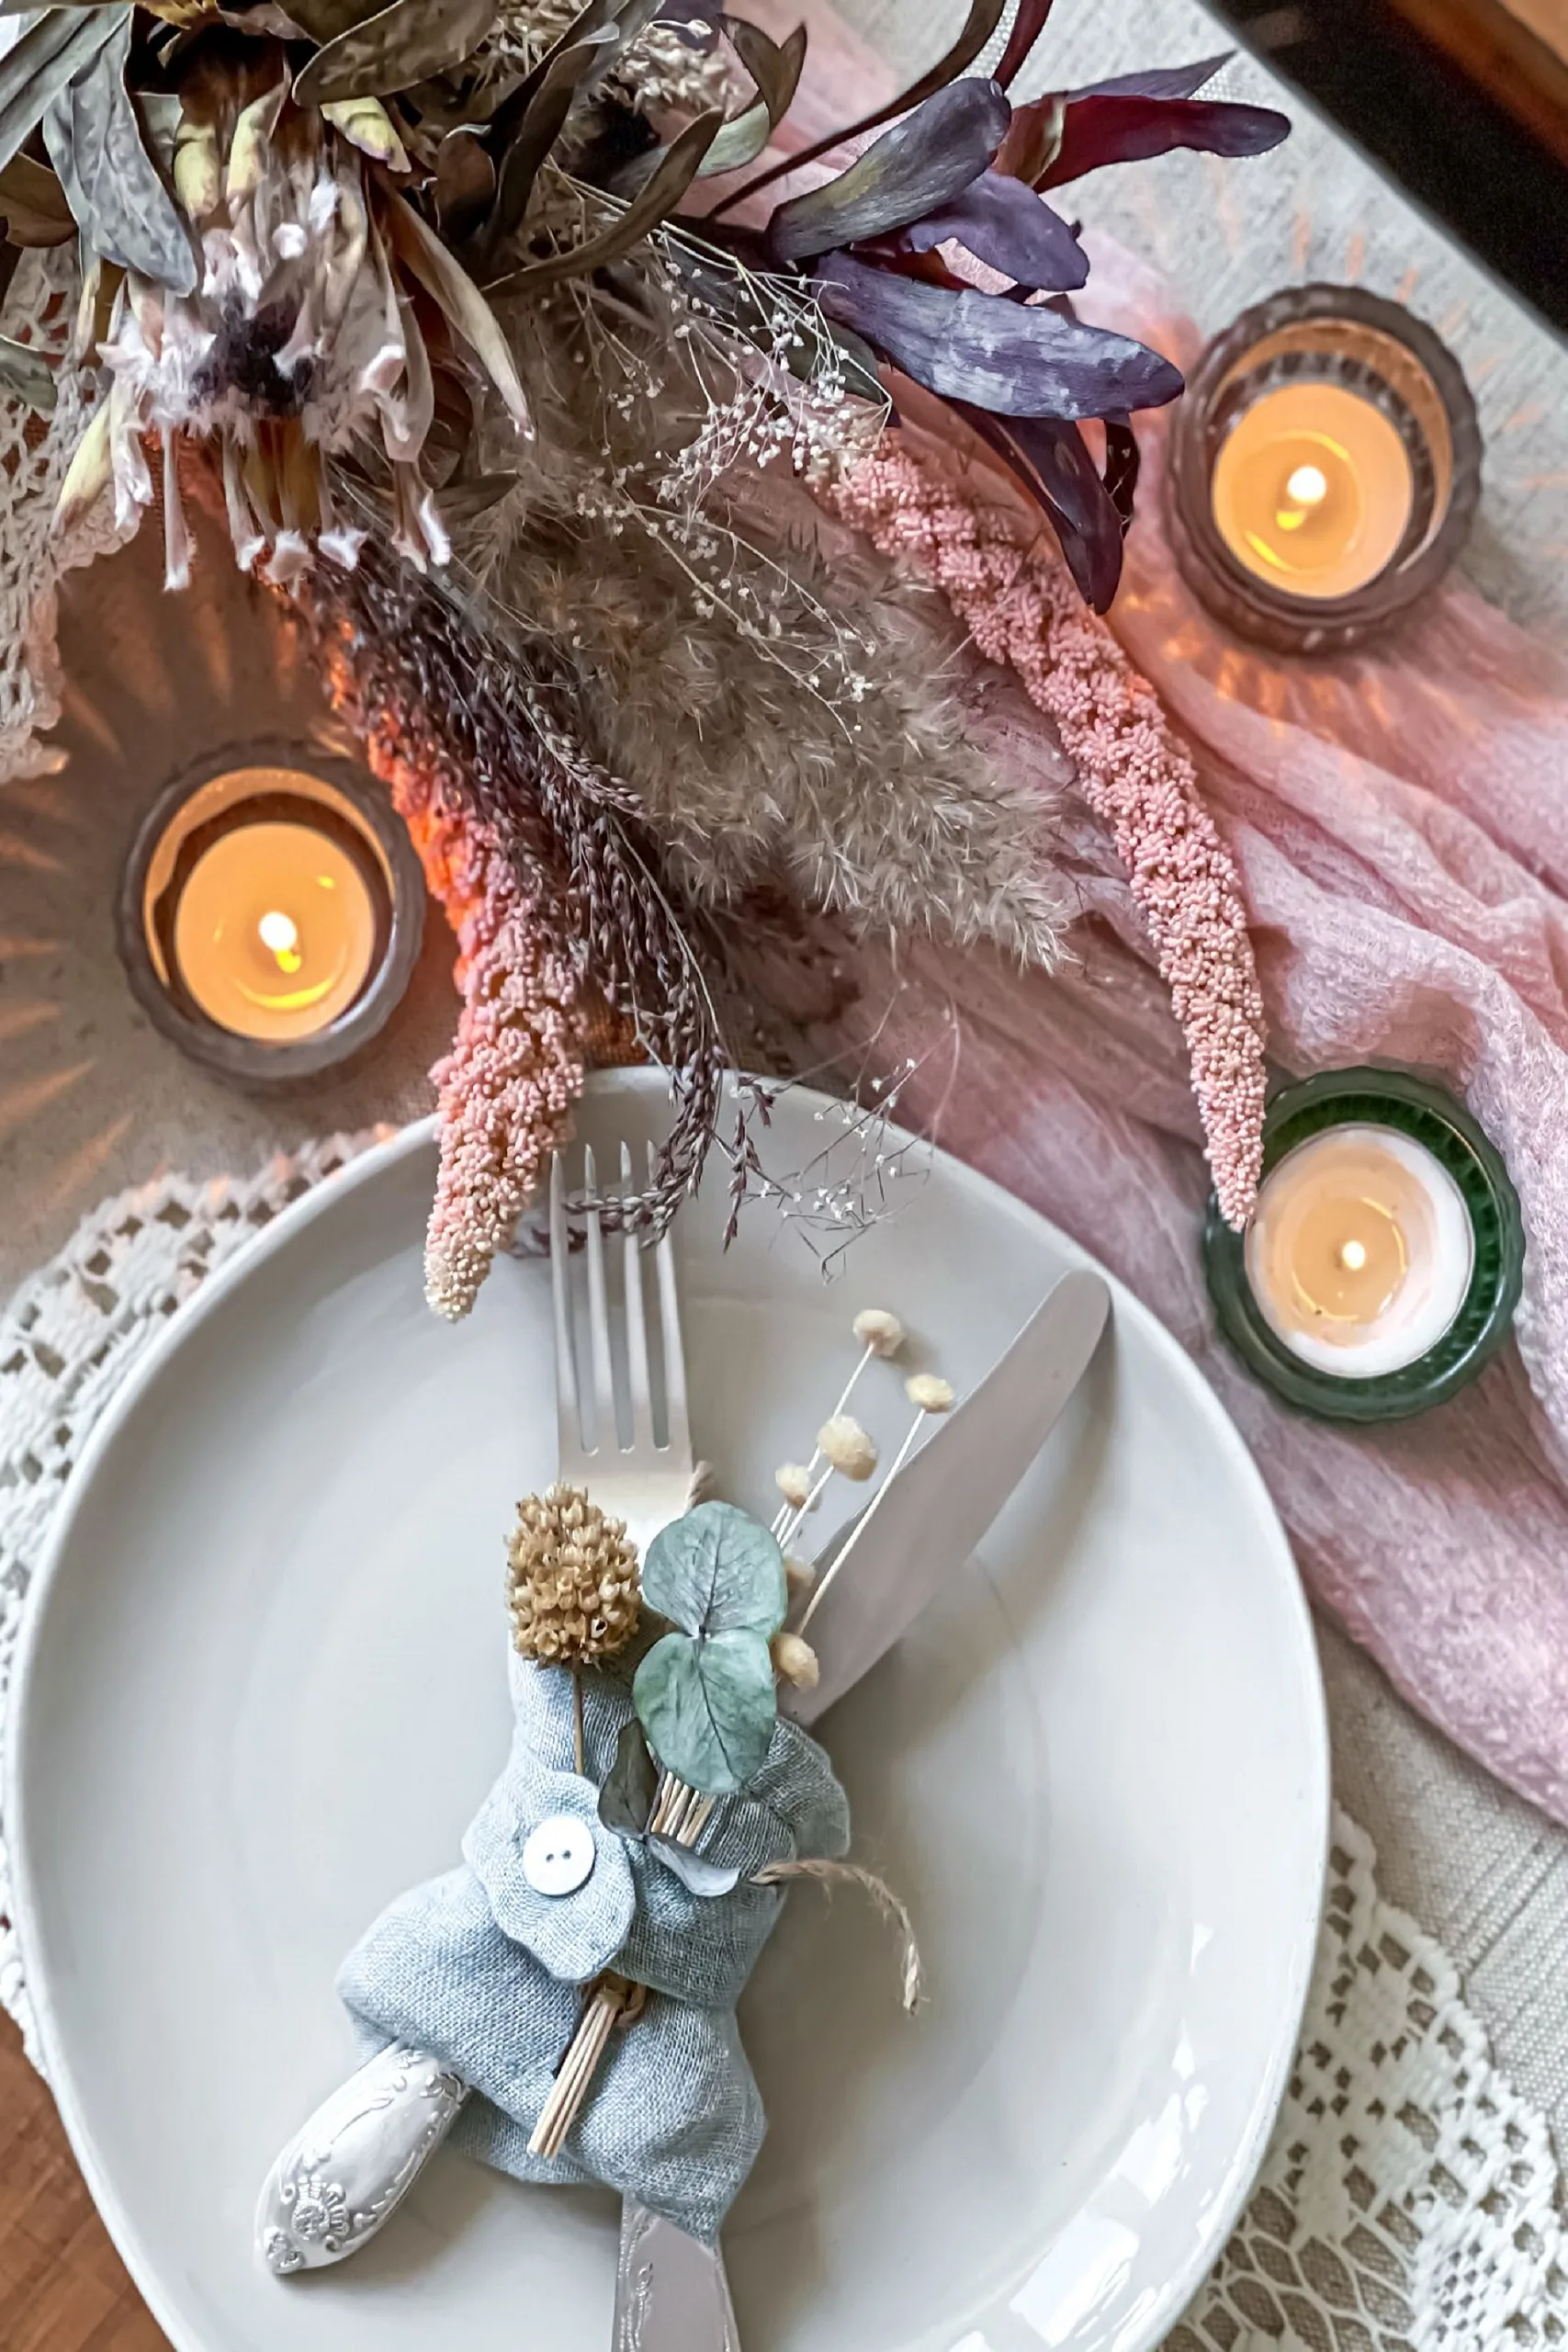 Table setting for a romantic dinner, wedding or any occasion with candles and dried flowers as decor.